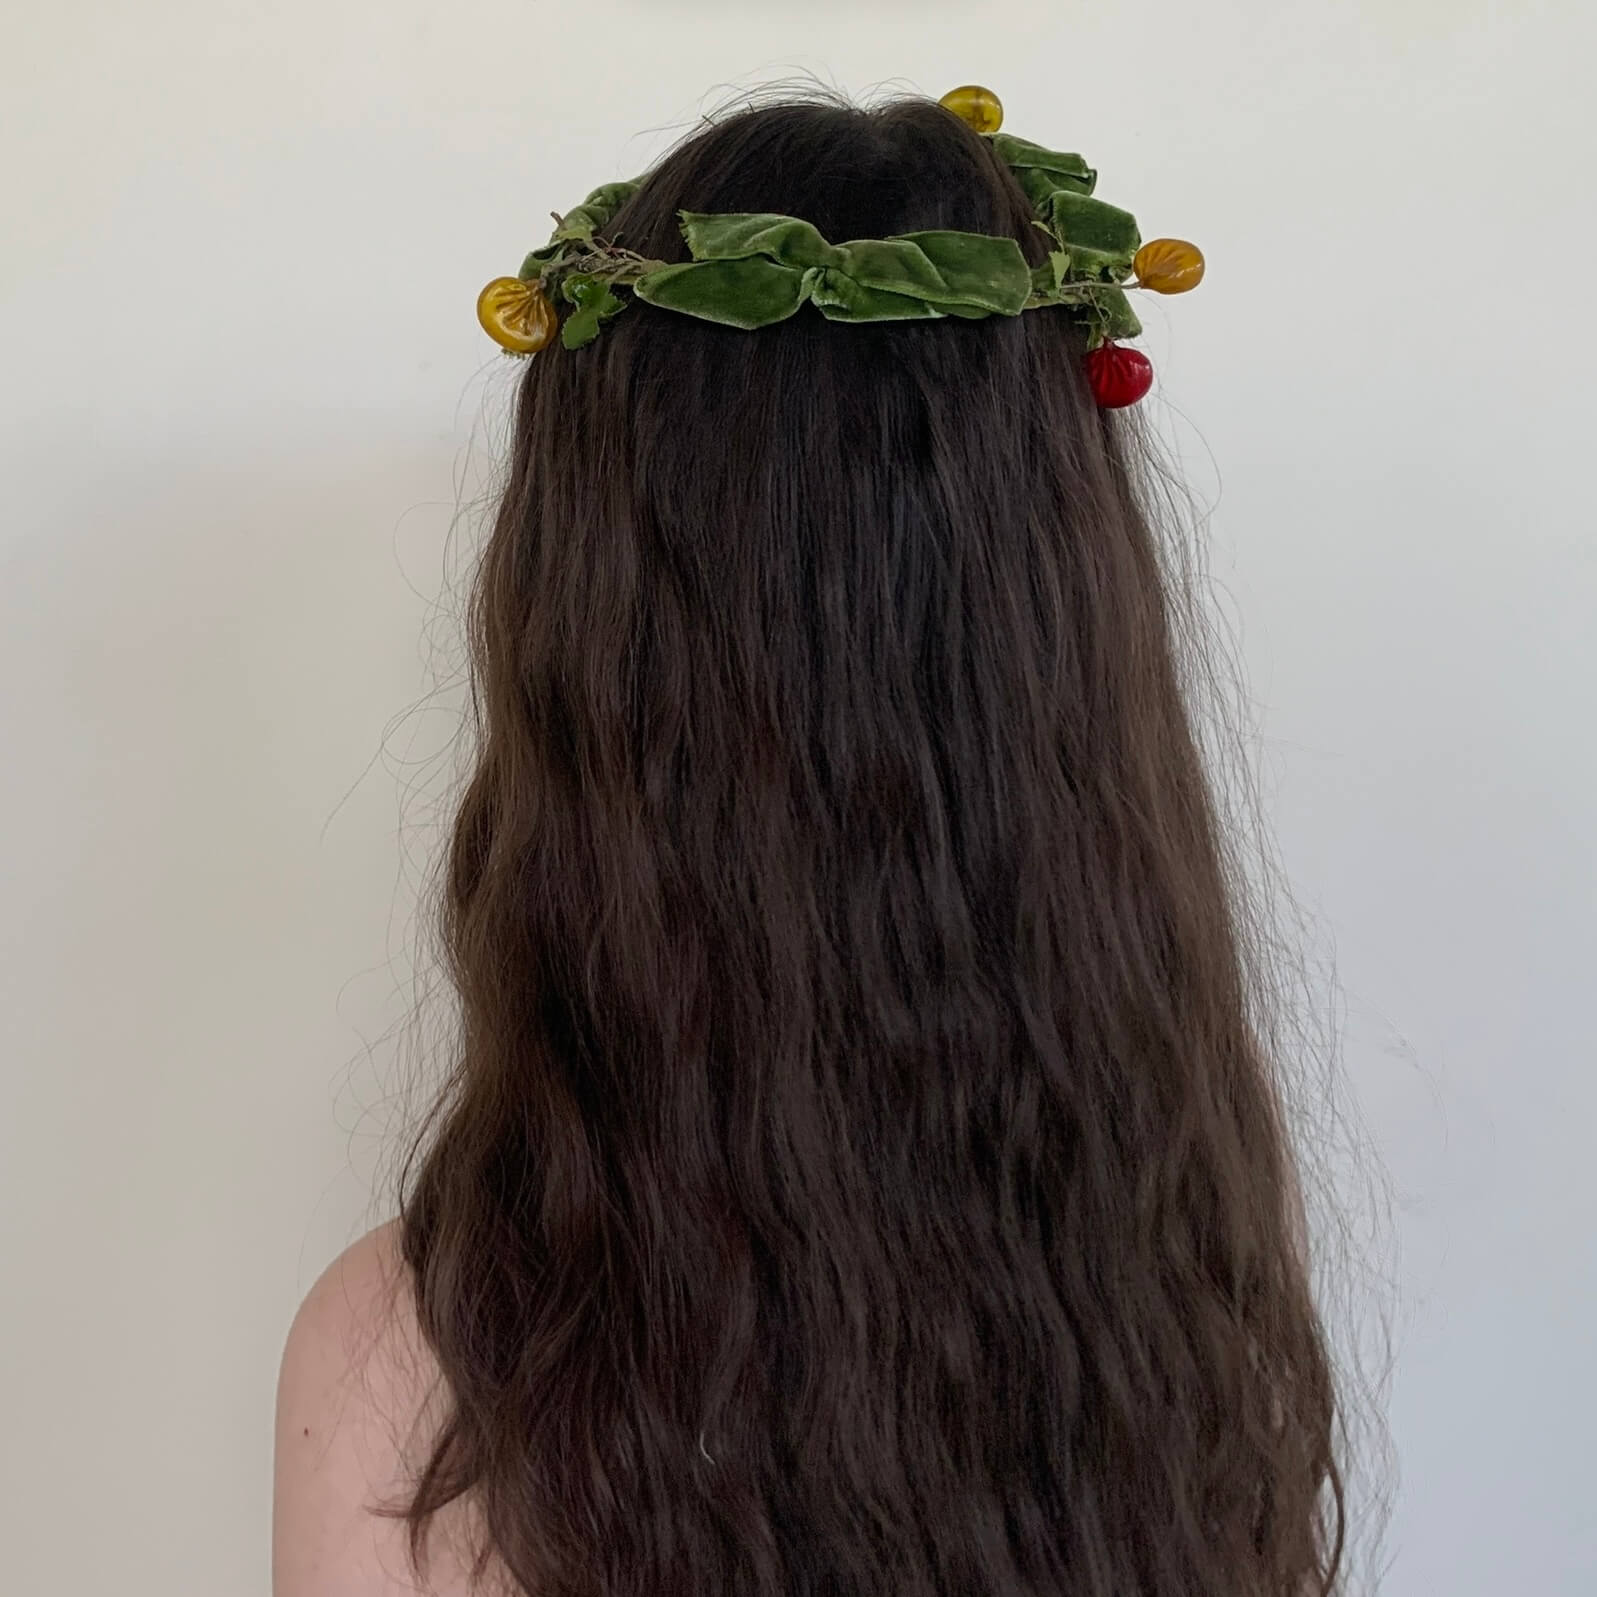 back view of the vintage head piece